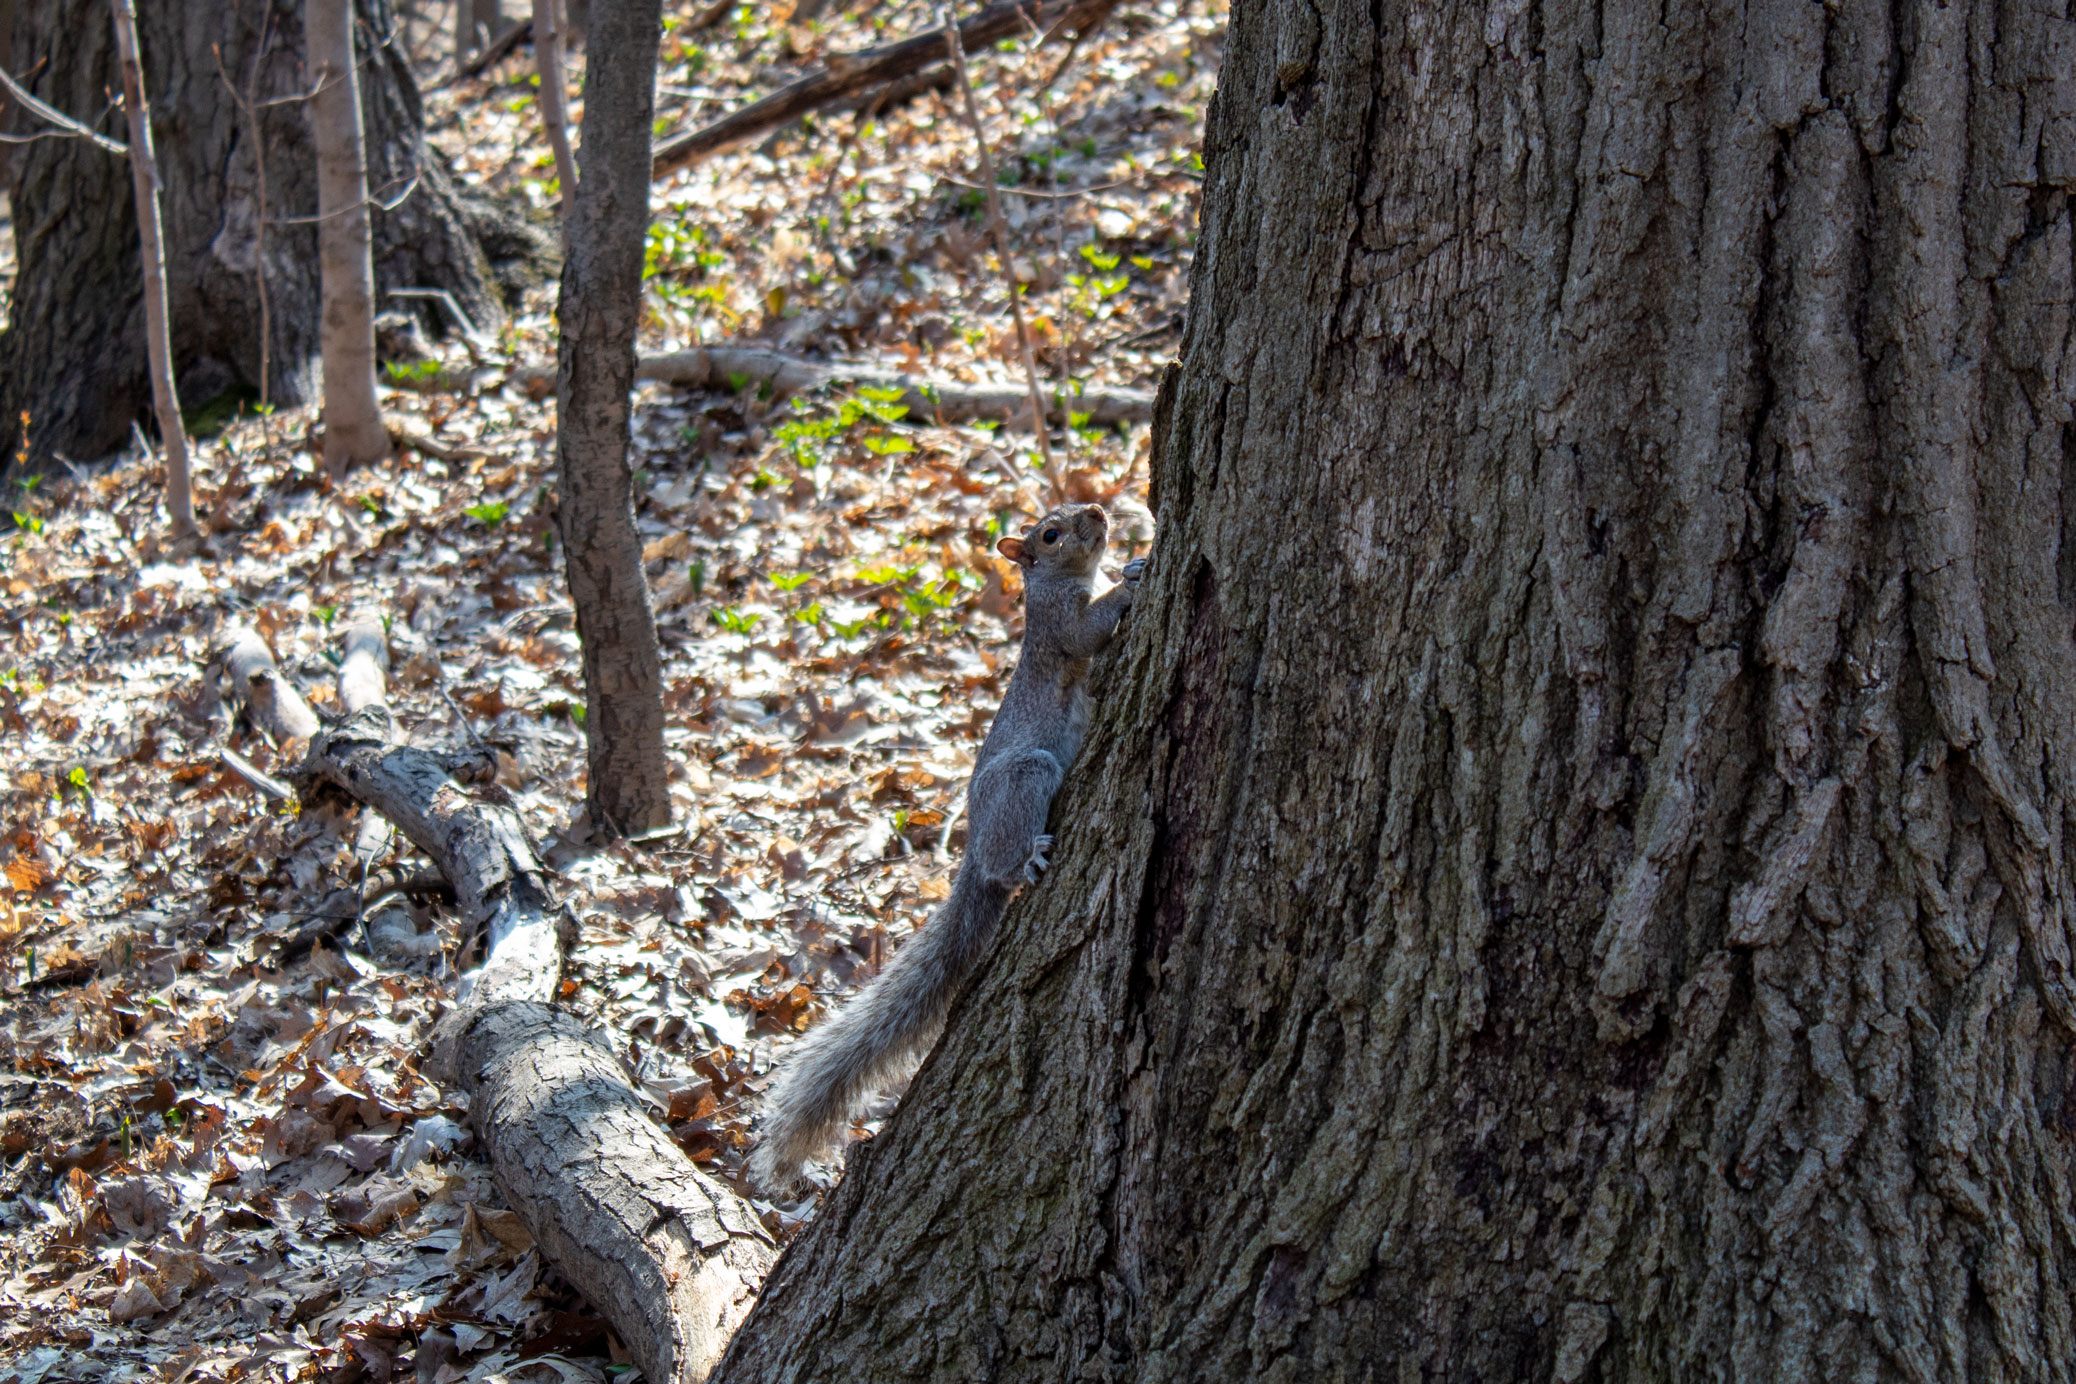 Squirrel clinging to the side of a tree in the woods